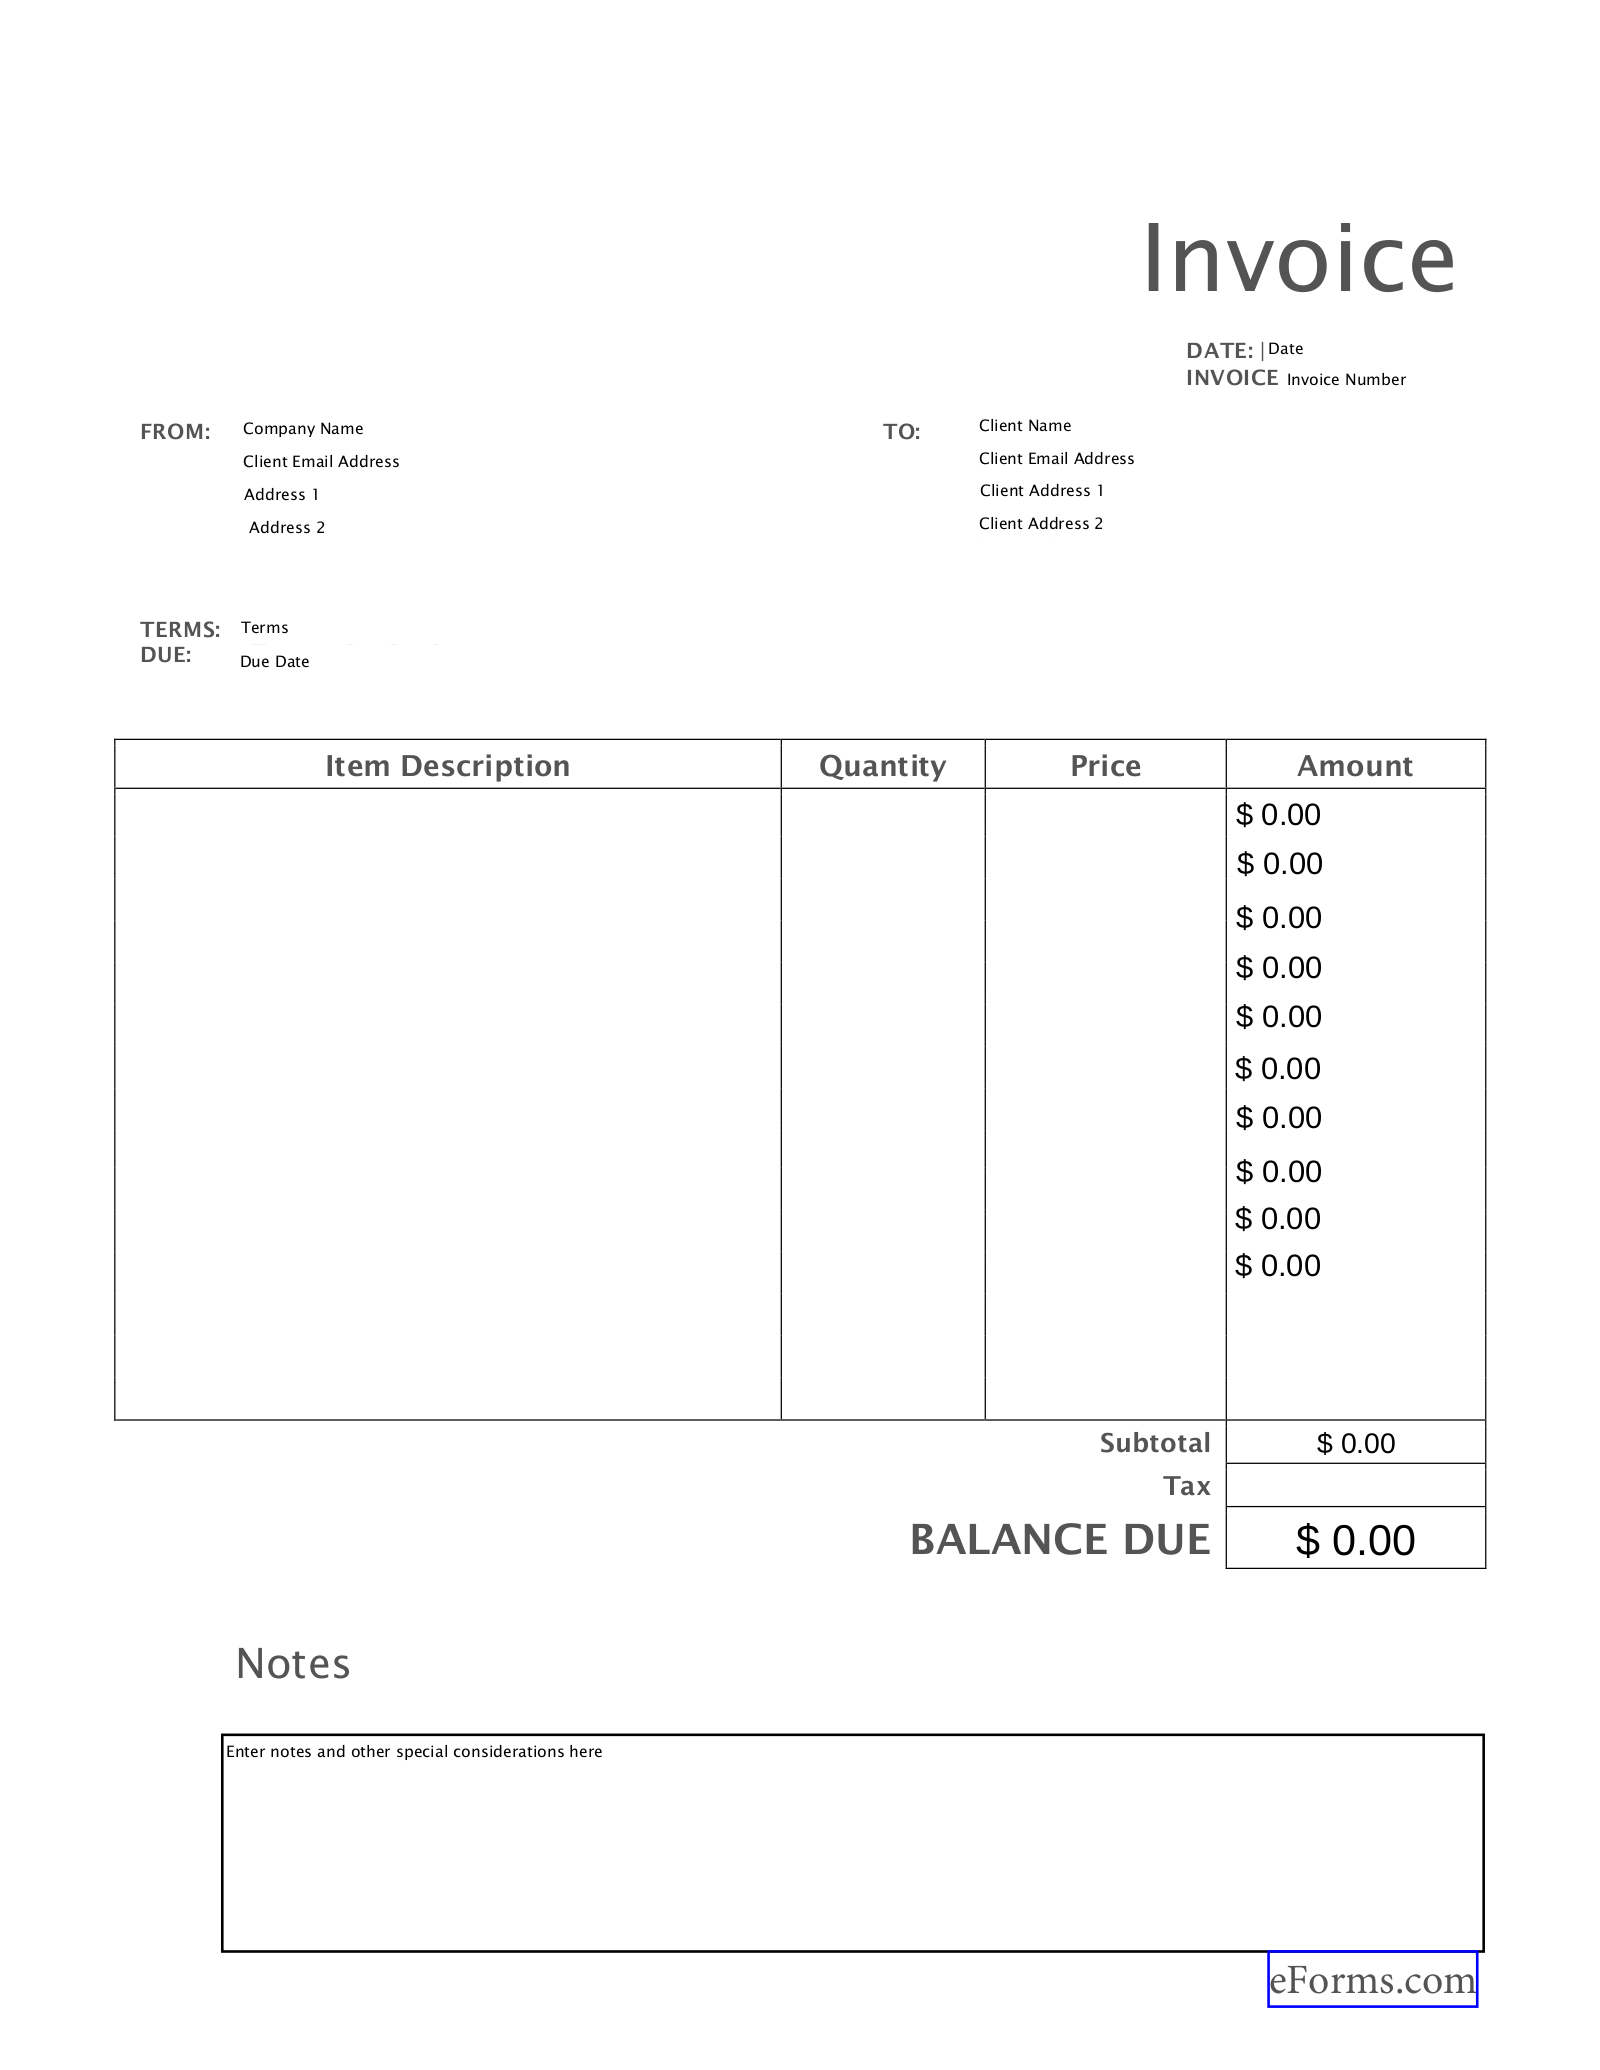 Free Blank Invoice Templates - PDF – eForms With Free Downloadable Invoice Template For Word